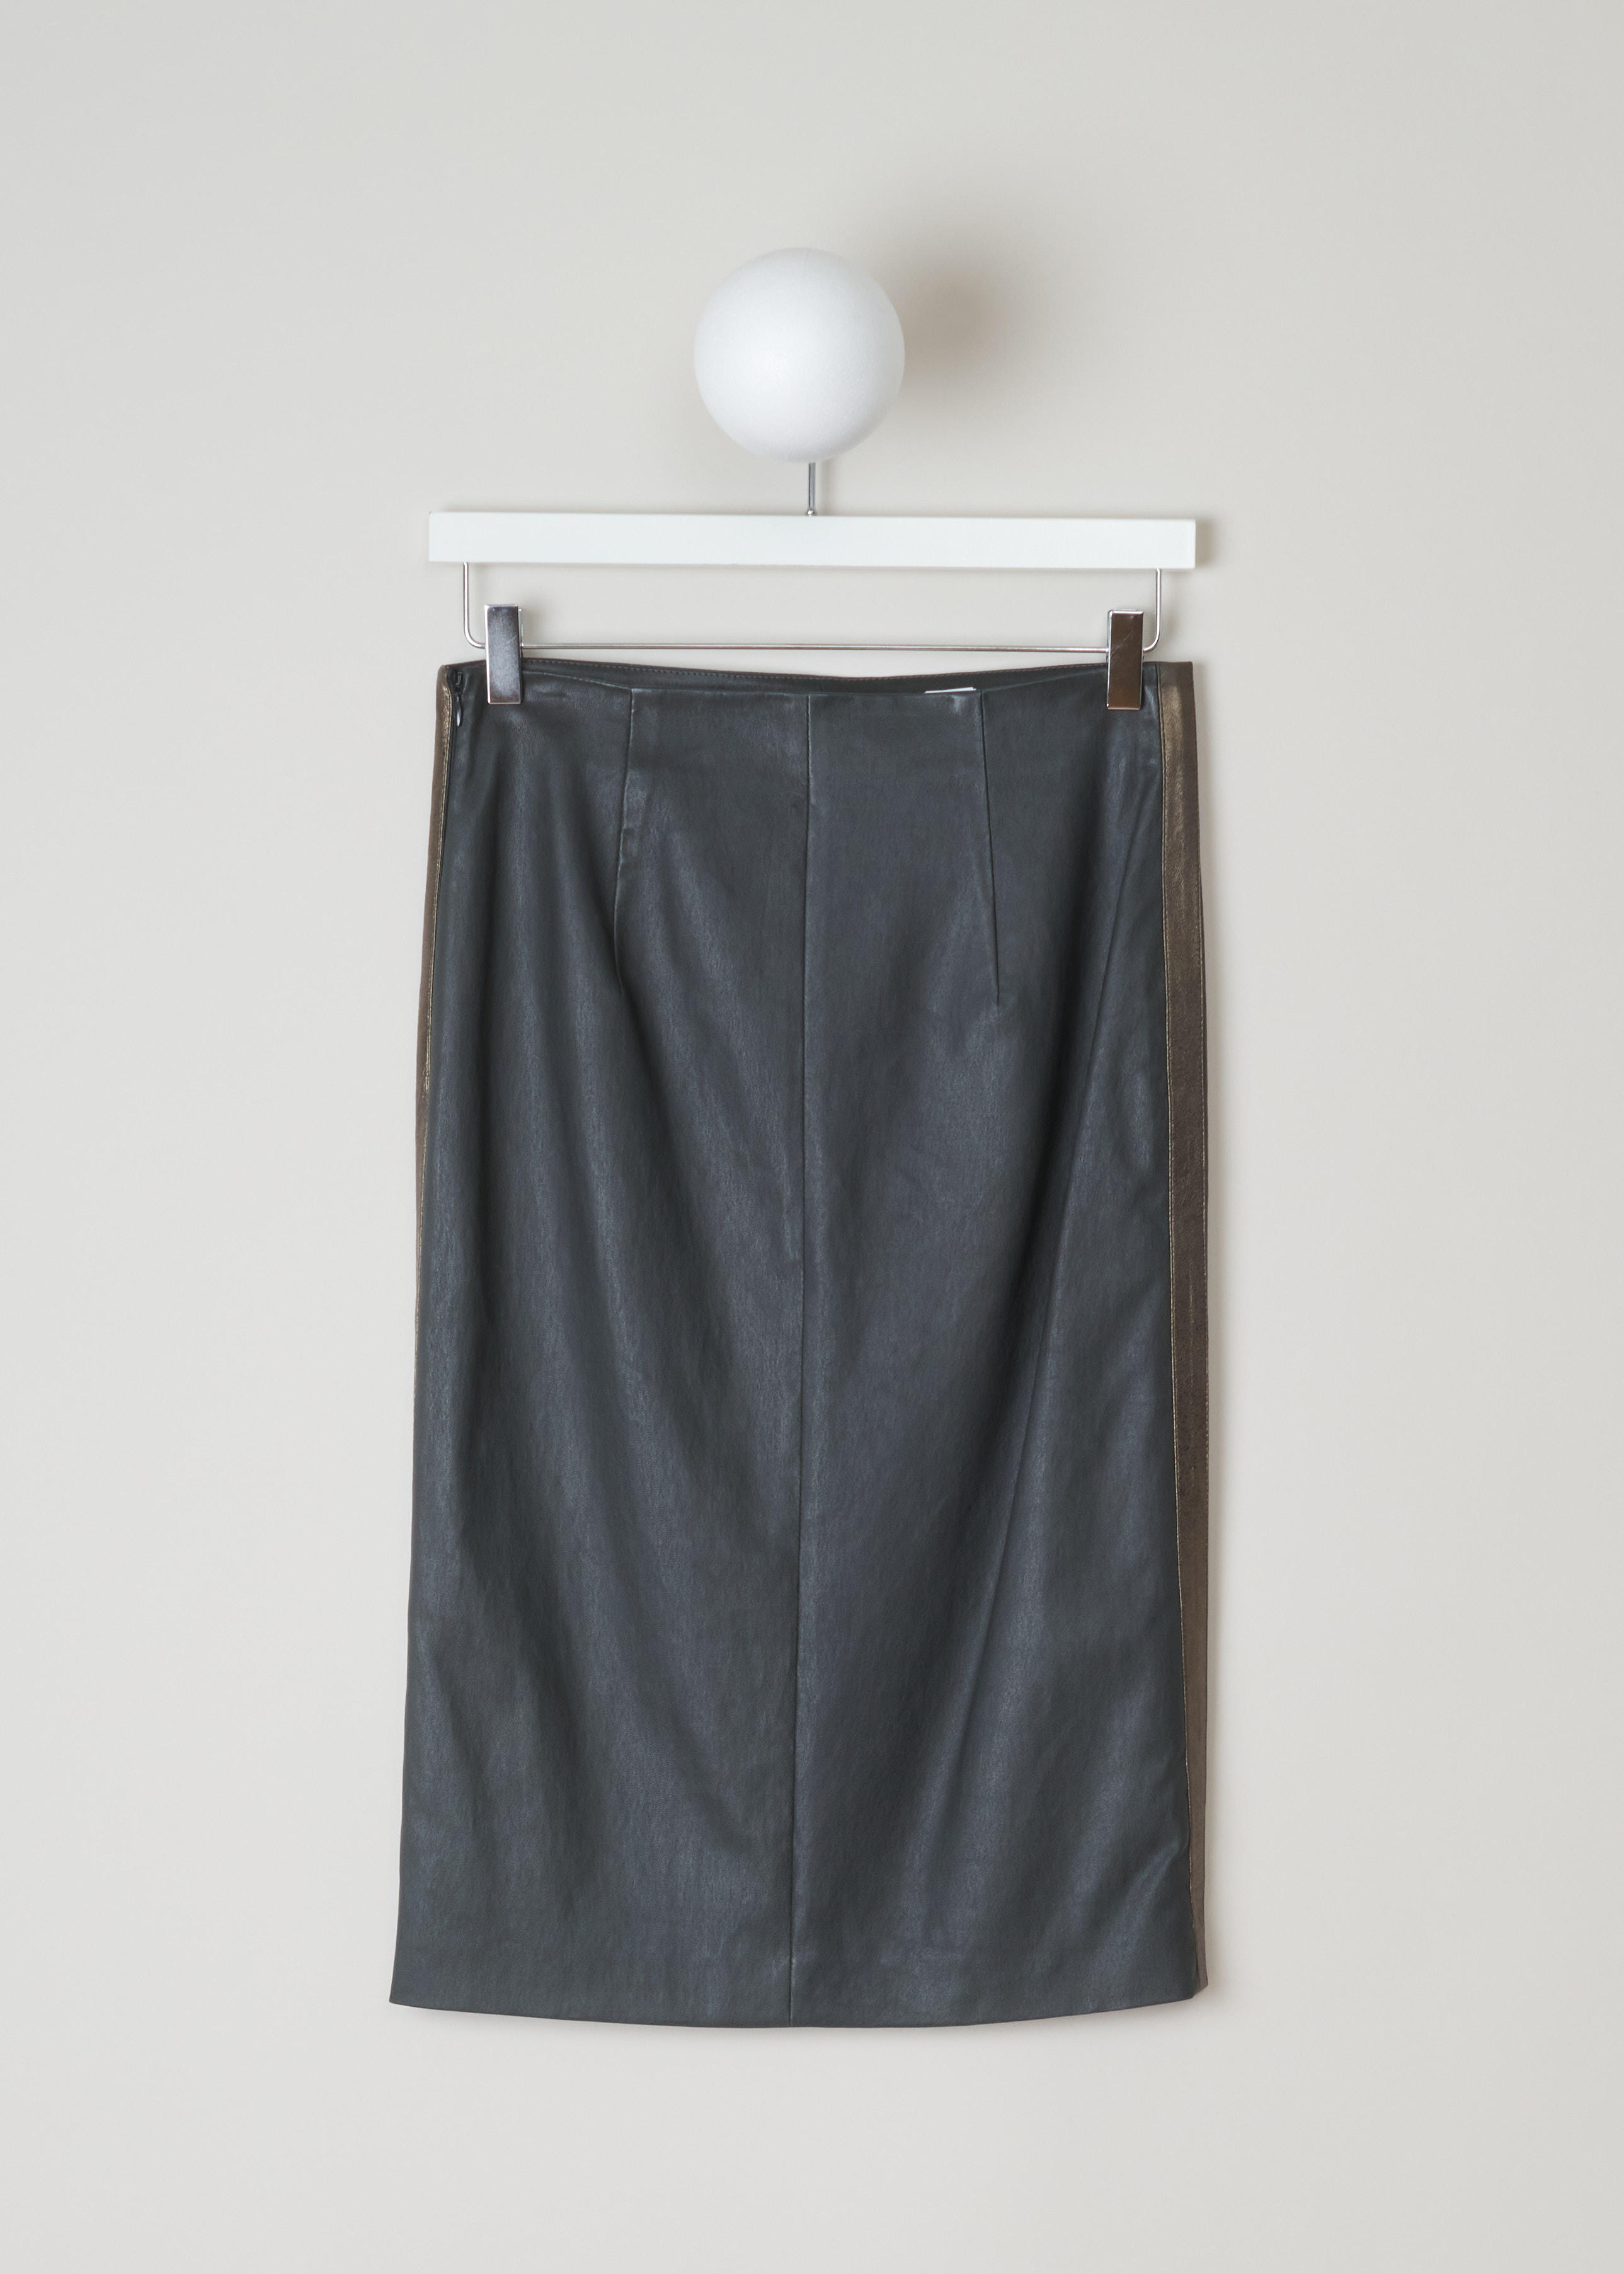 Brunello Cucinelli Grey leather skirt, M0V32G2584_CS896 grey back. Leather skirt with a light stretch, Has a knee-length, metallic beading on the sides and an invisible zipper fastening on the back.